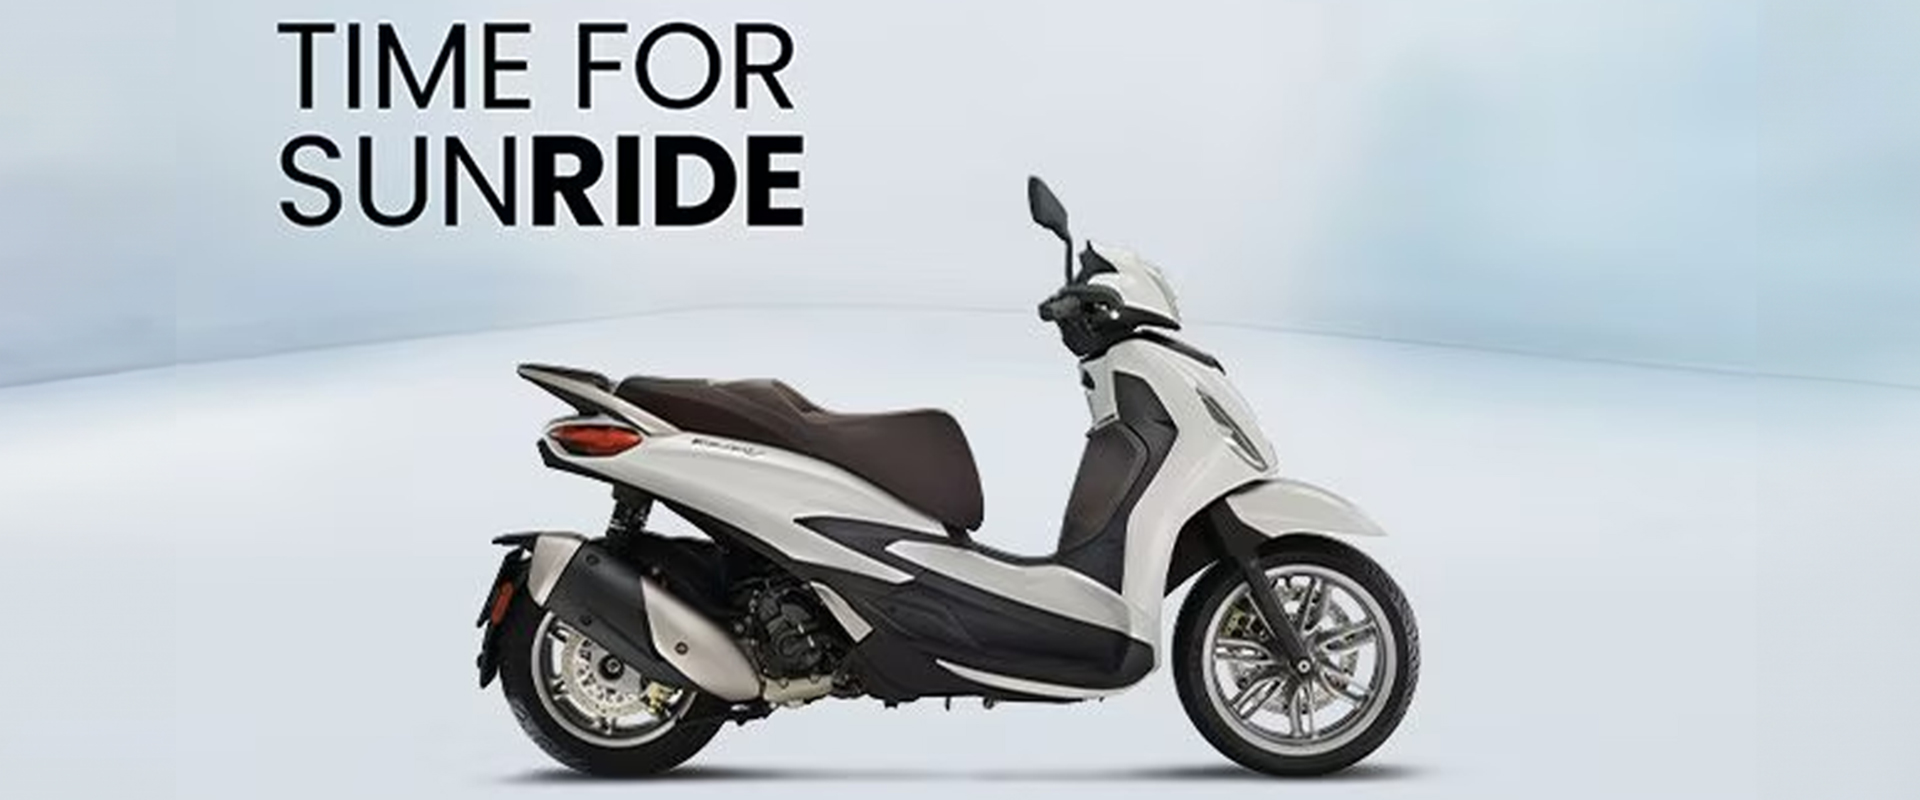 PIAGGIO BEVERLY FROM 99€/MONTH*��